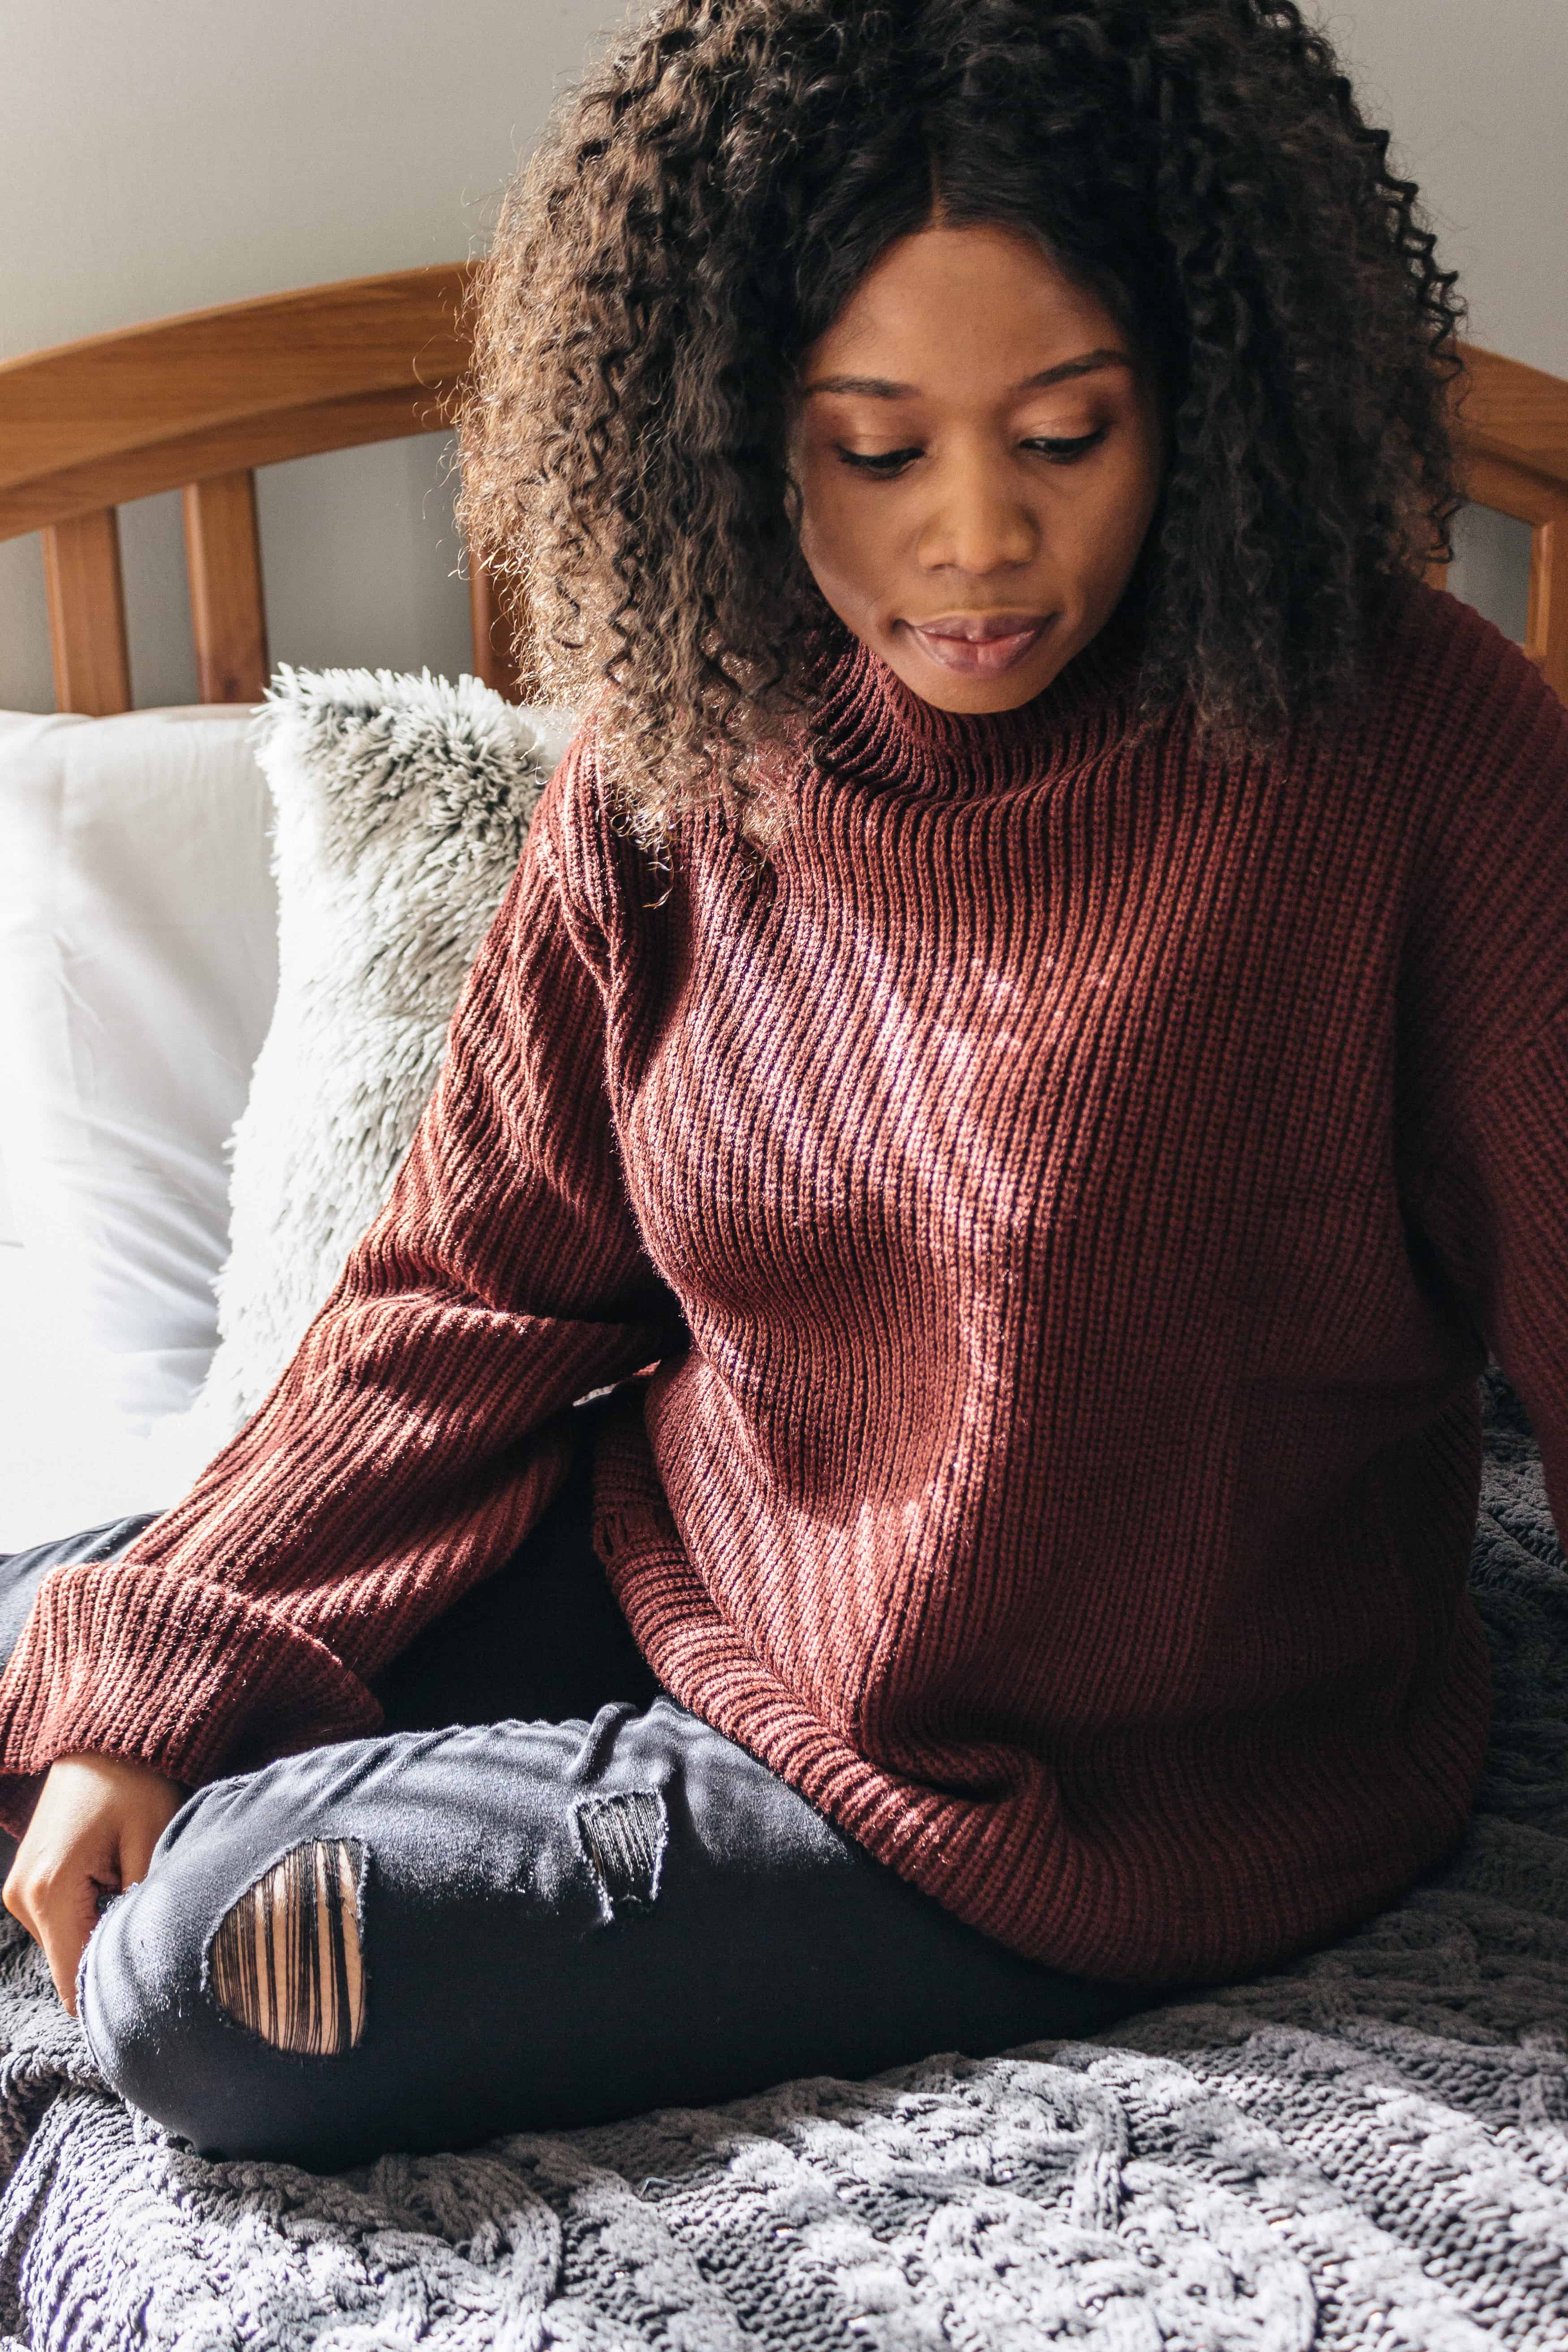 3 Casual Fall Favorites from Tobi. I'm sharing a few of my favorite fashion finds for fall. Click pin to see how I styled this Tobi chunky knit sweater with distressed denim and shop my looks.